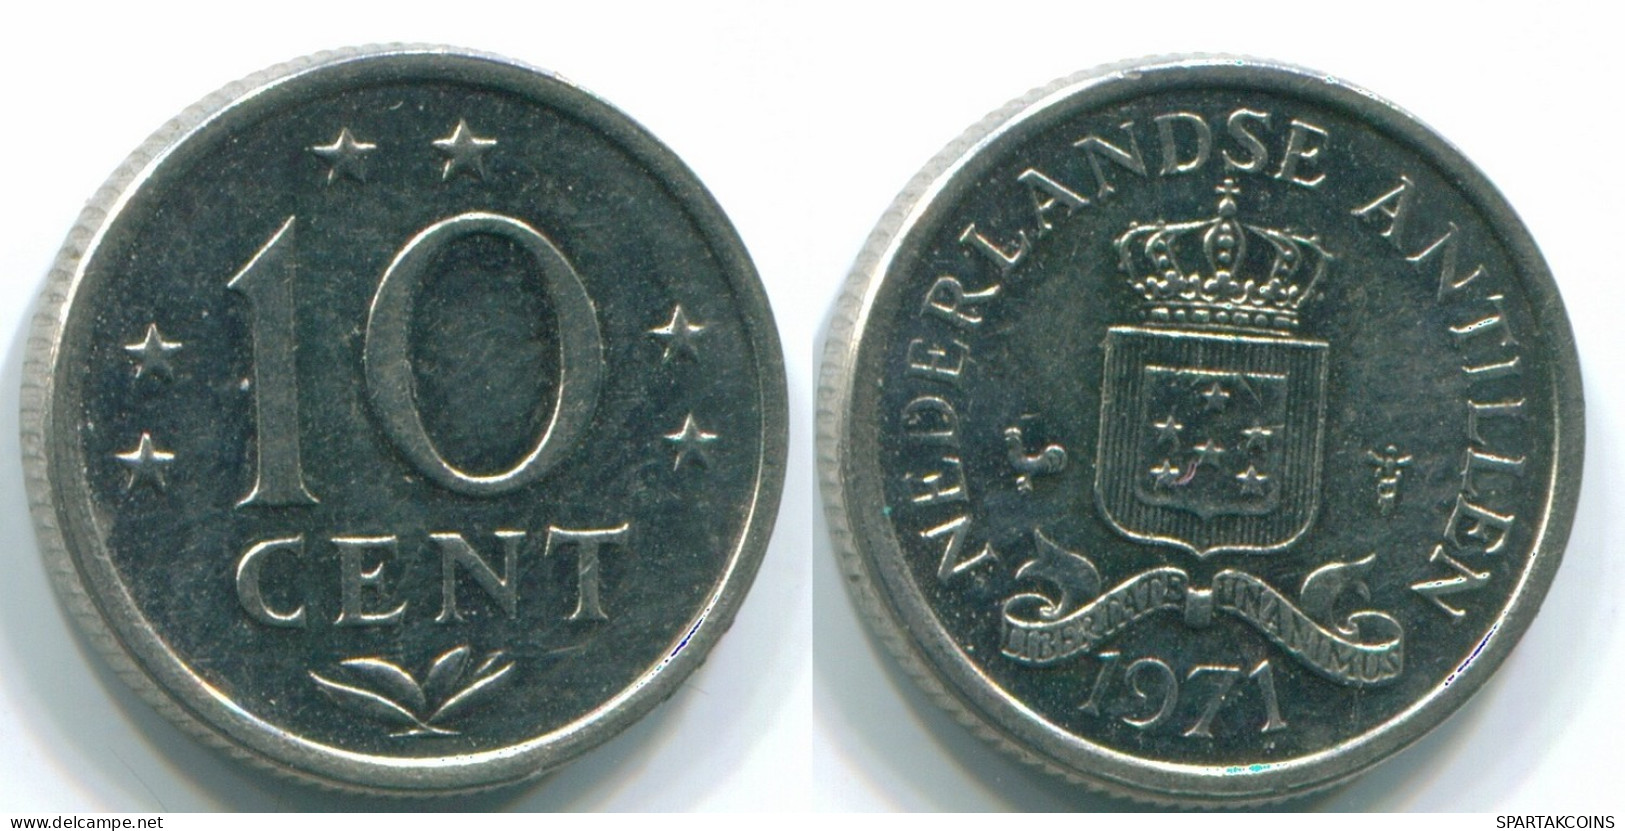 10 CENTS 1971 NETHERLANDS ANTILLES Nickel Colonial Coin #S13460.U.A - Netherlands Antilles